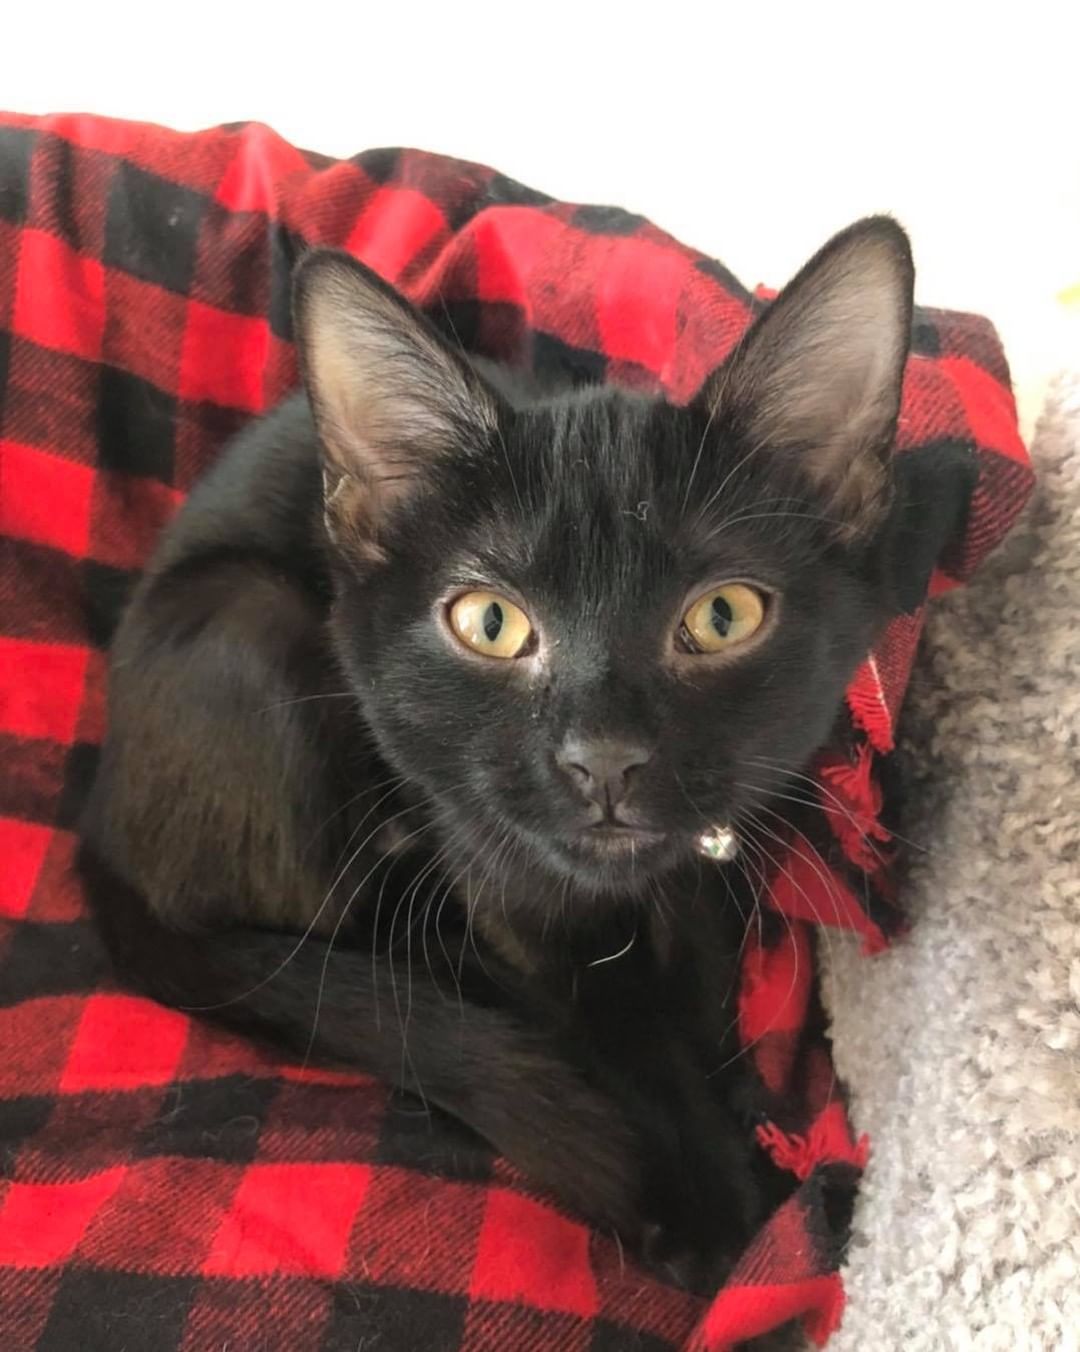 Our tenth black kitty for November is Penelope! She loves to snuggle and play with her siblings. She also loves to sit in your lap and make biscuits. Her favorite thing to do is to steal foster mom’s heating pad when she gets up from her chair 😹 Penelope is about 4 months old, spayed, FIV/FELV negative and up to date on vaccines. To put in an application click on the link below.

https://www.sbanimalrescue.org/adopt